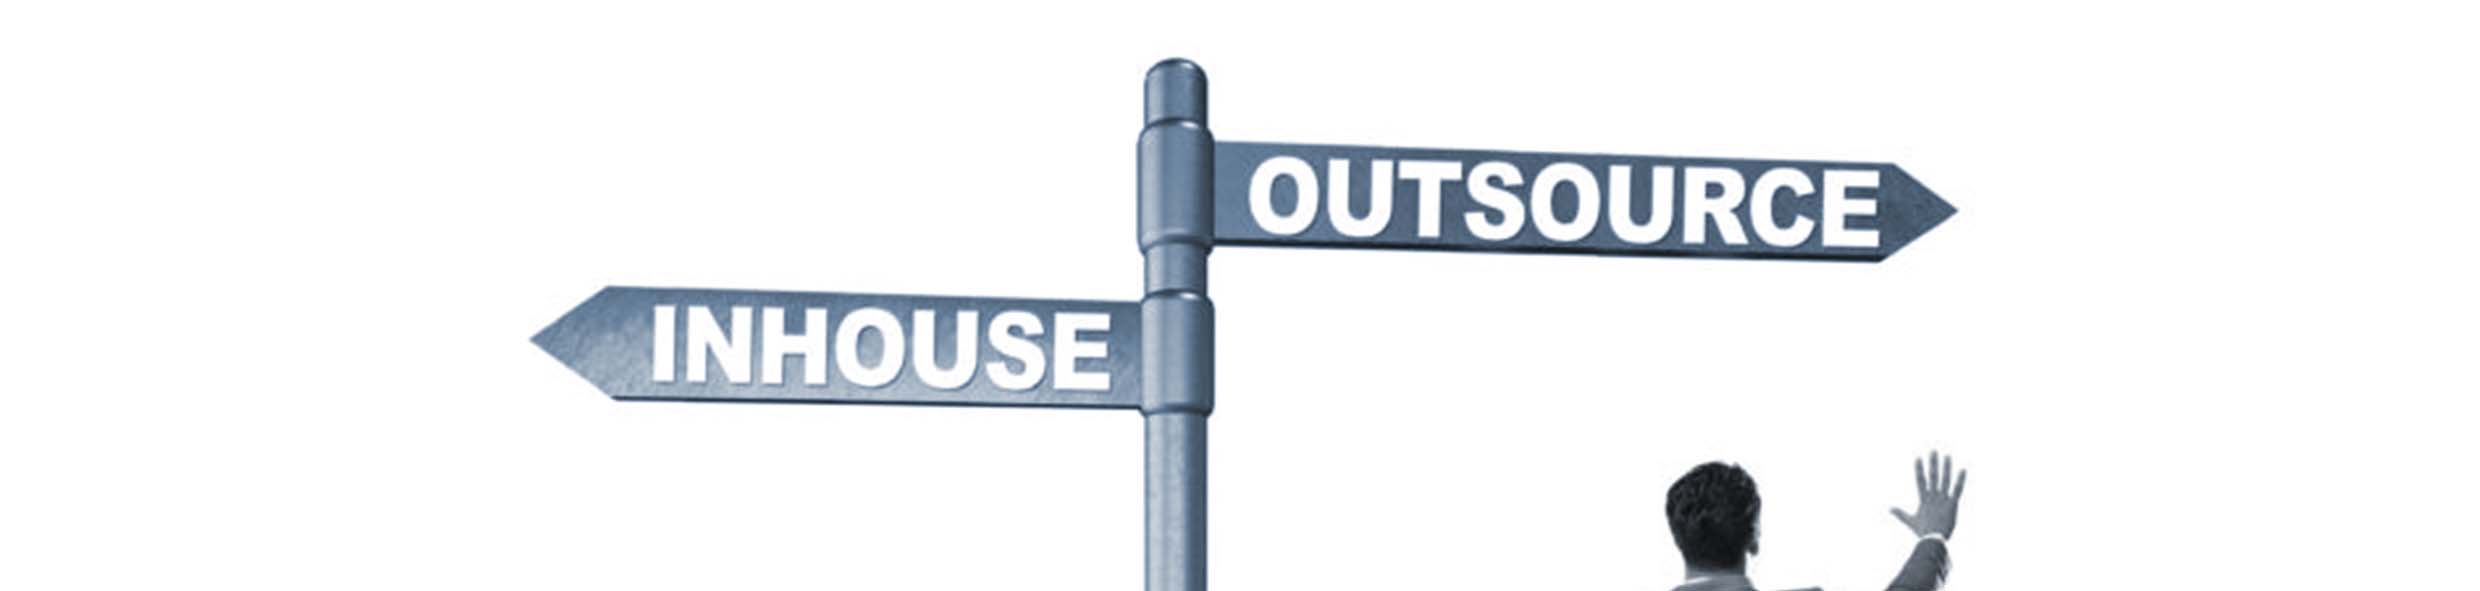 Image of a signpost pointing in two directions. One is in-house and the other outsource.